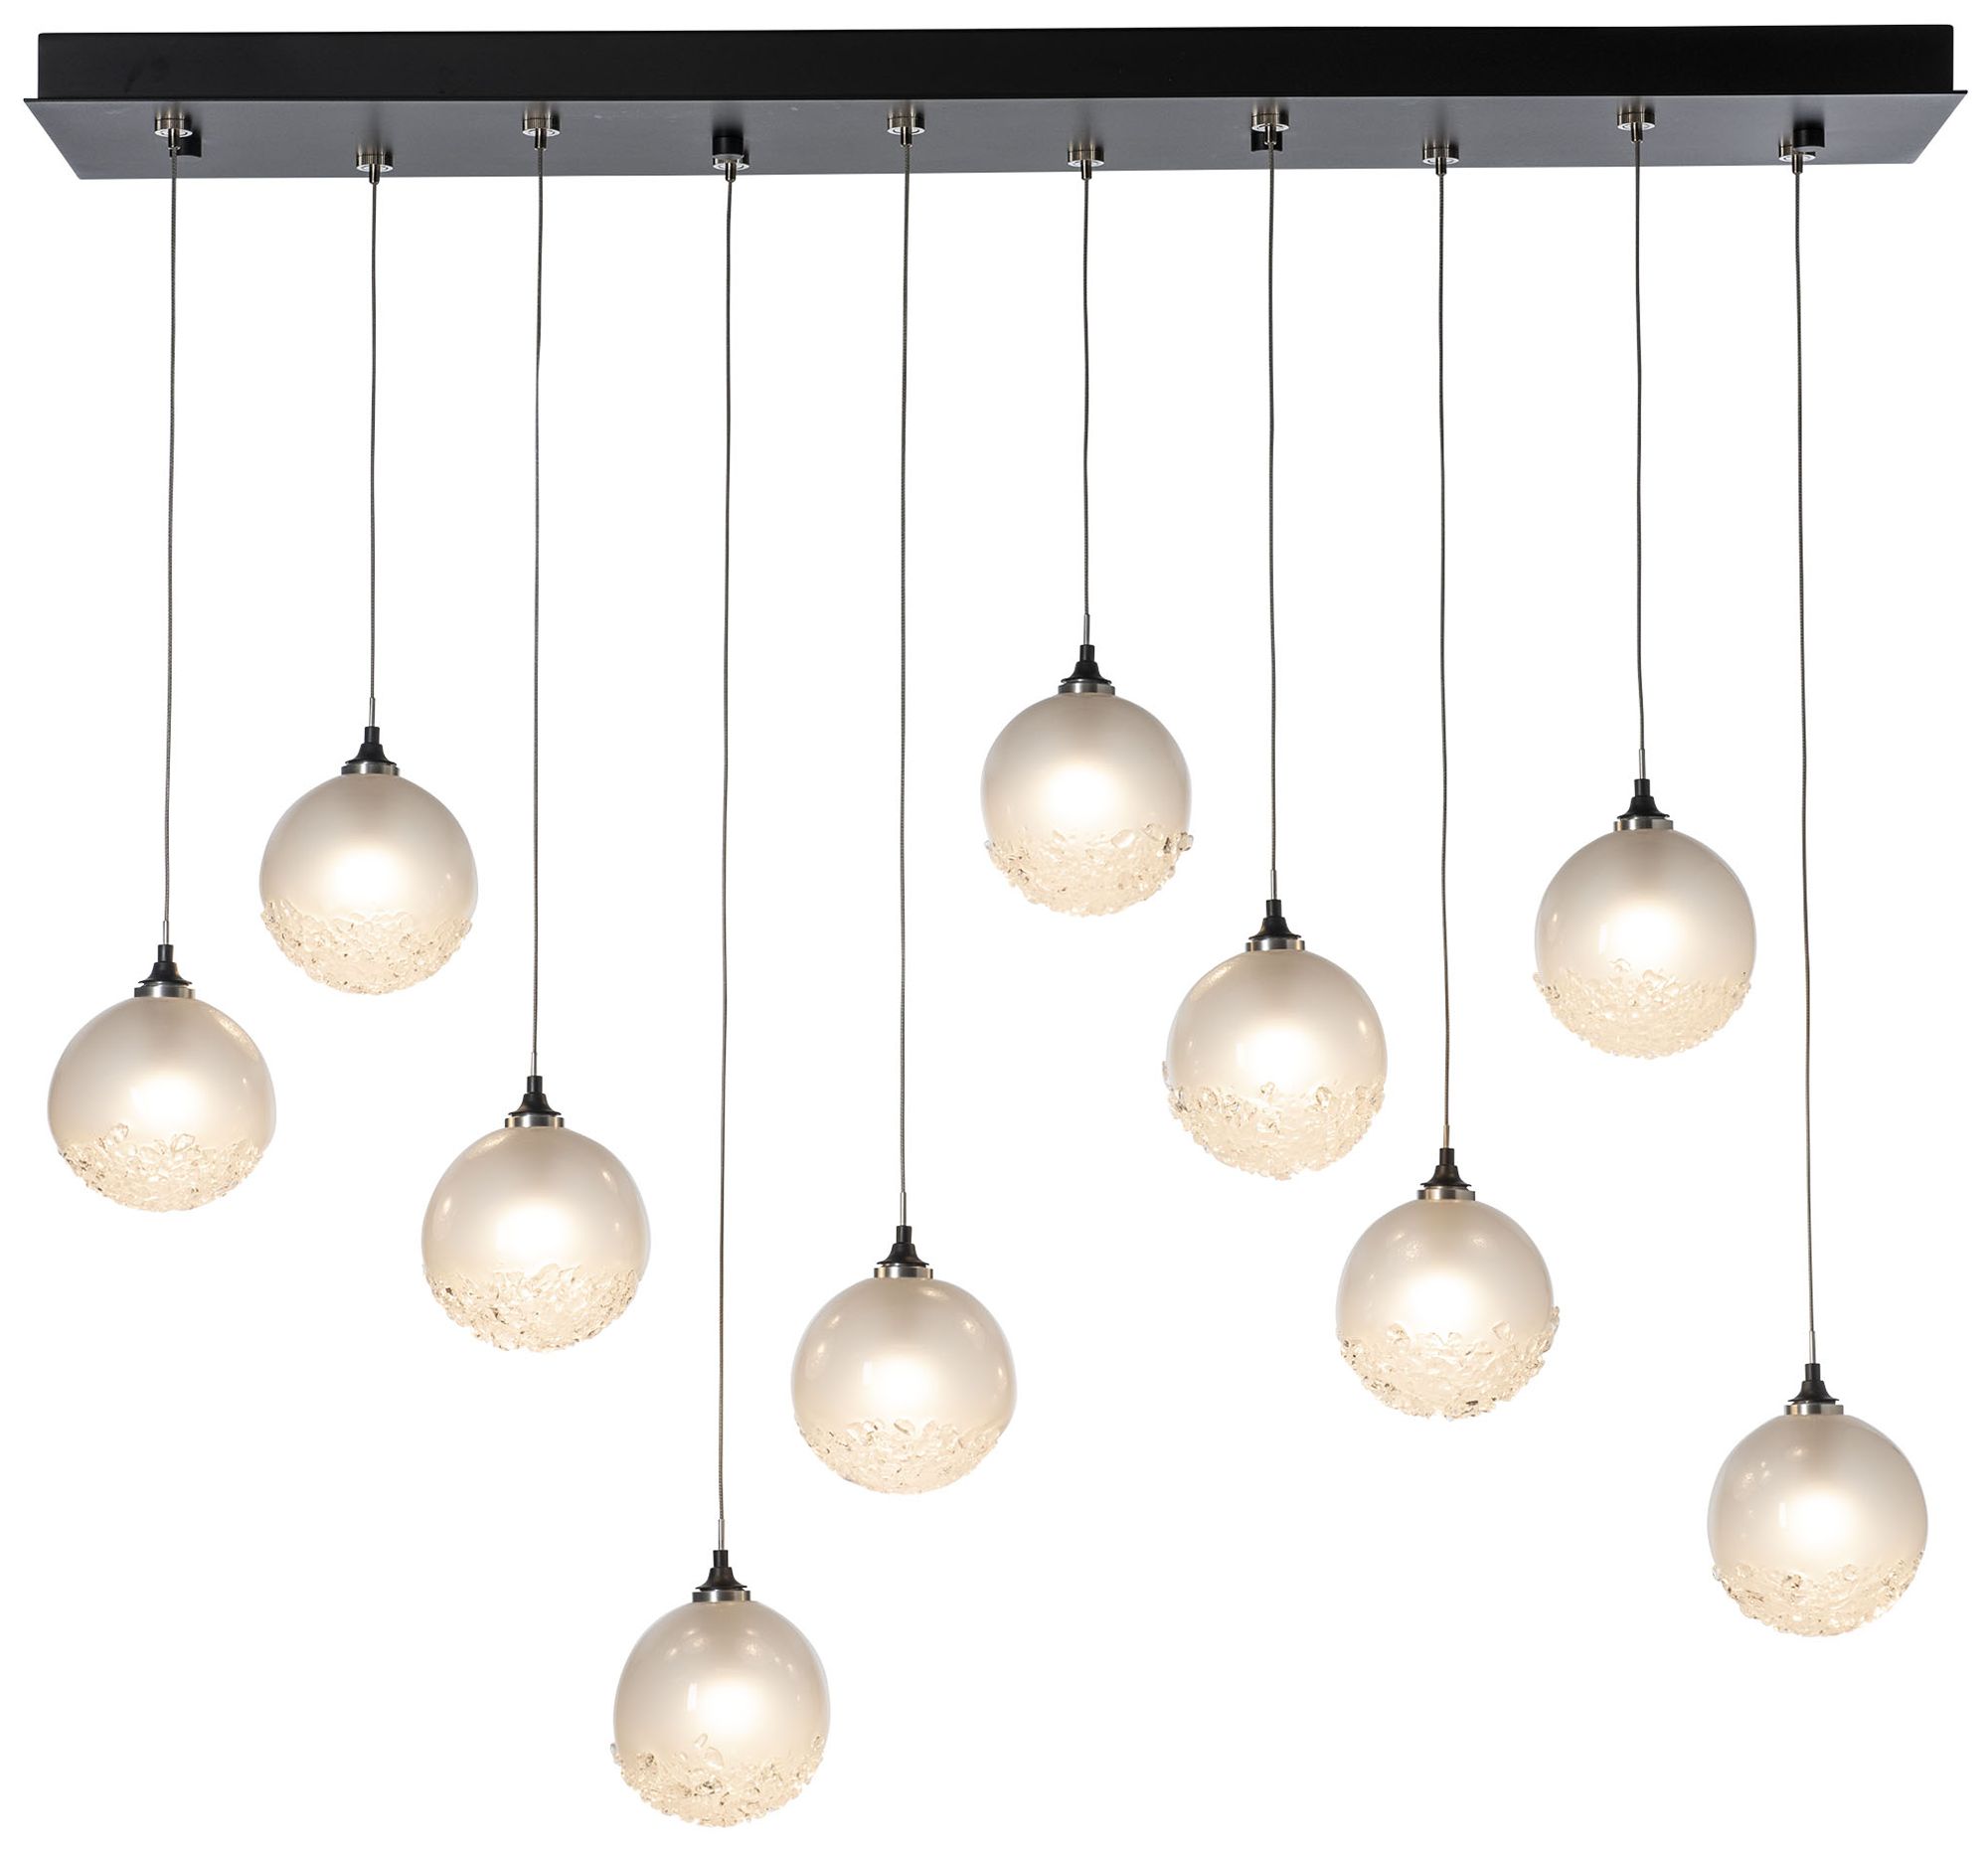 Fritz 9.4" Wide 10-Light Black Globe Pendant With Frosted Glass